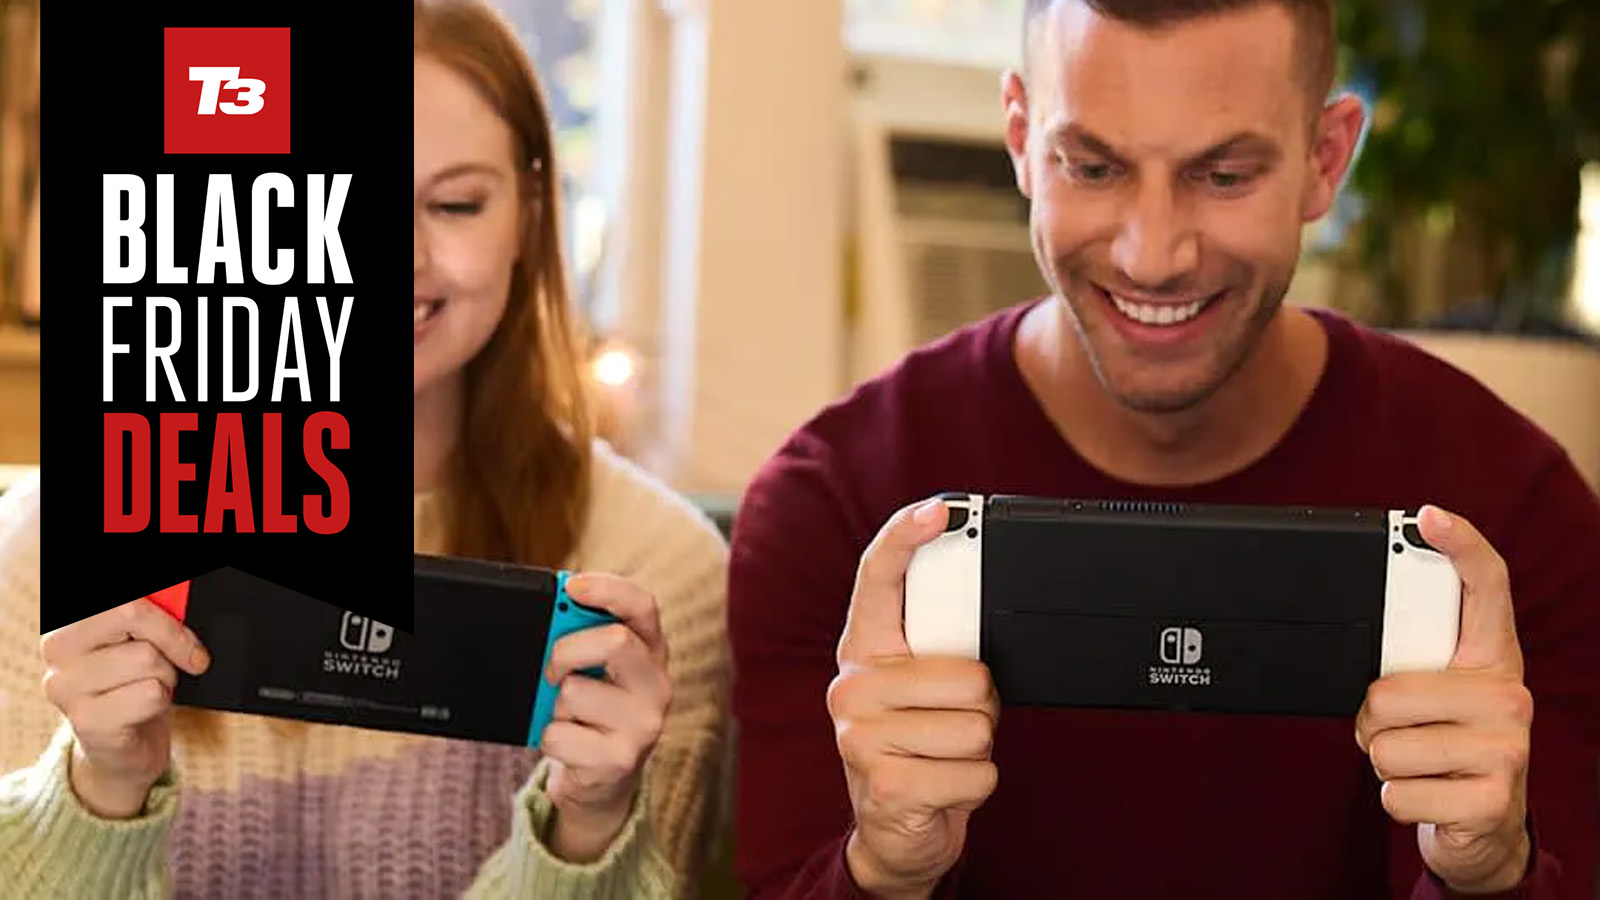 This Nintendo Switch SanDisk 1TB Micro SD is down to £104.99 at  in  this early Black Friday deal